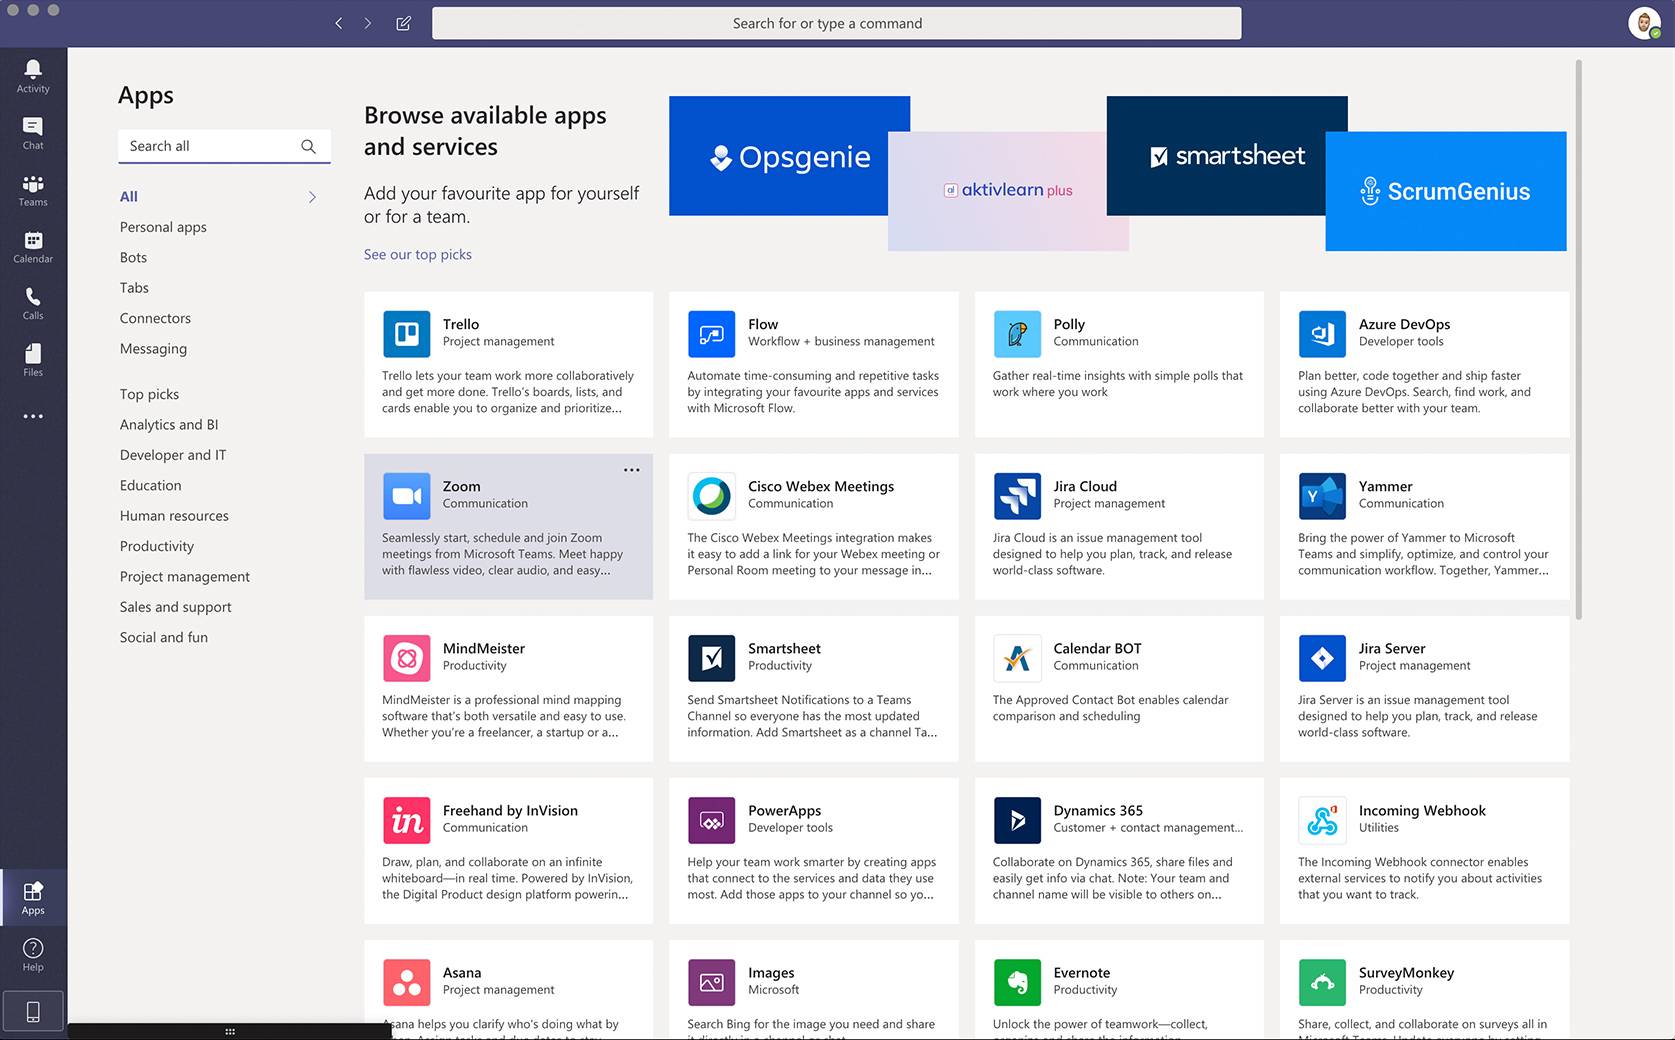 microsoft teams download instructions